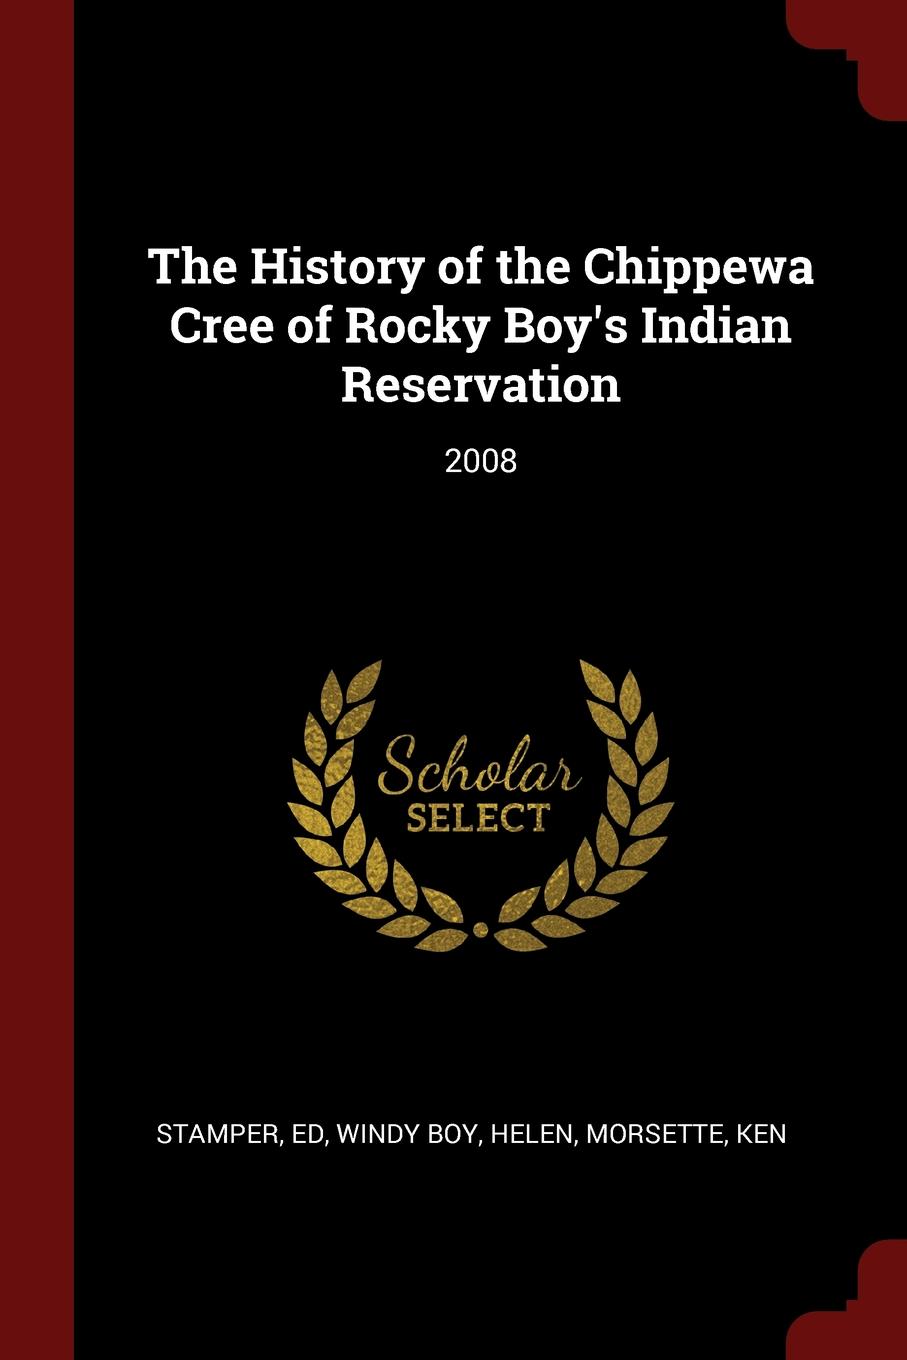 The History of the Chippewa Cree of Rocky Boy.s Indian Reservation. 2008